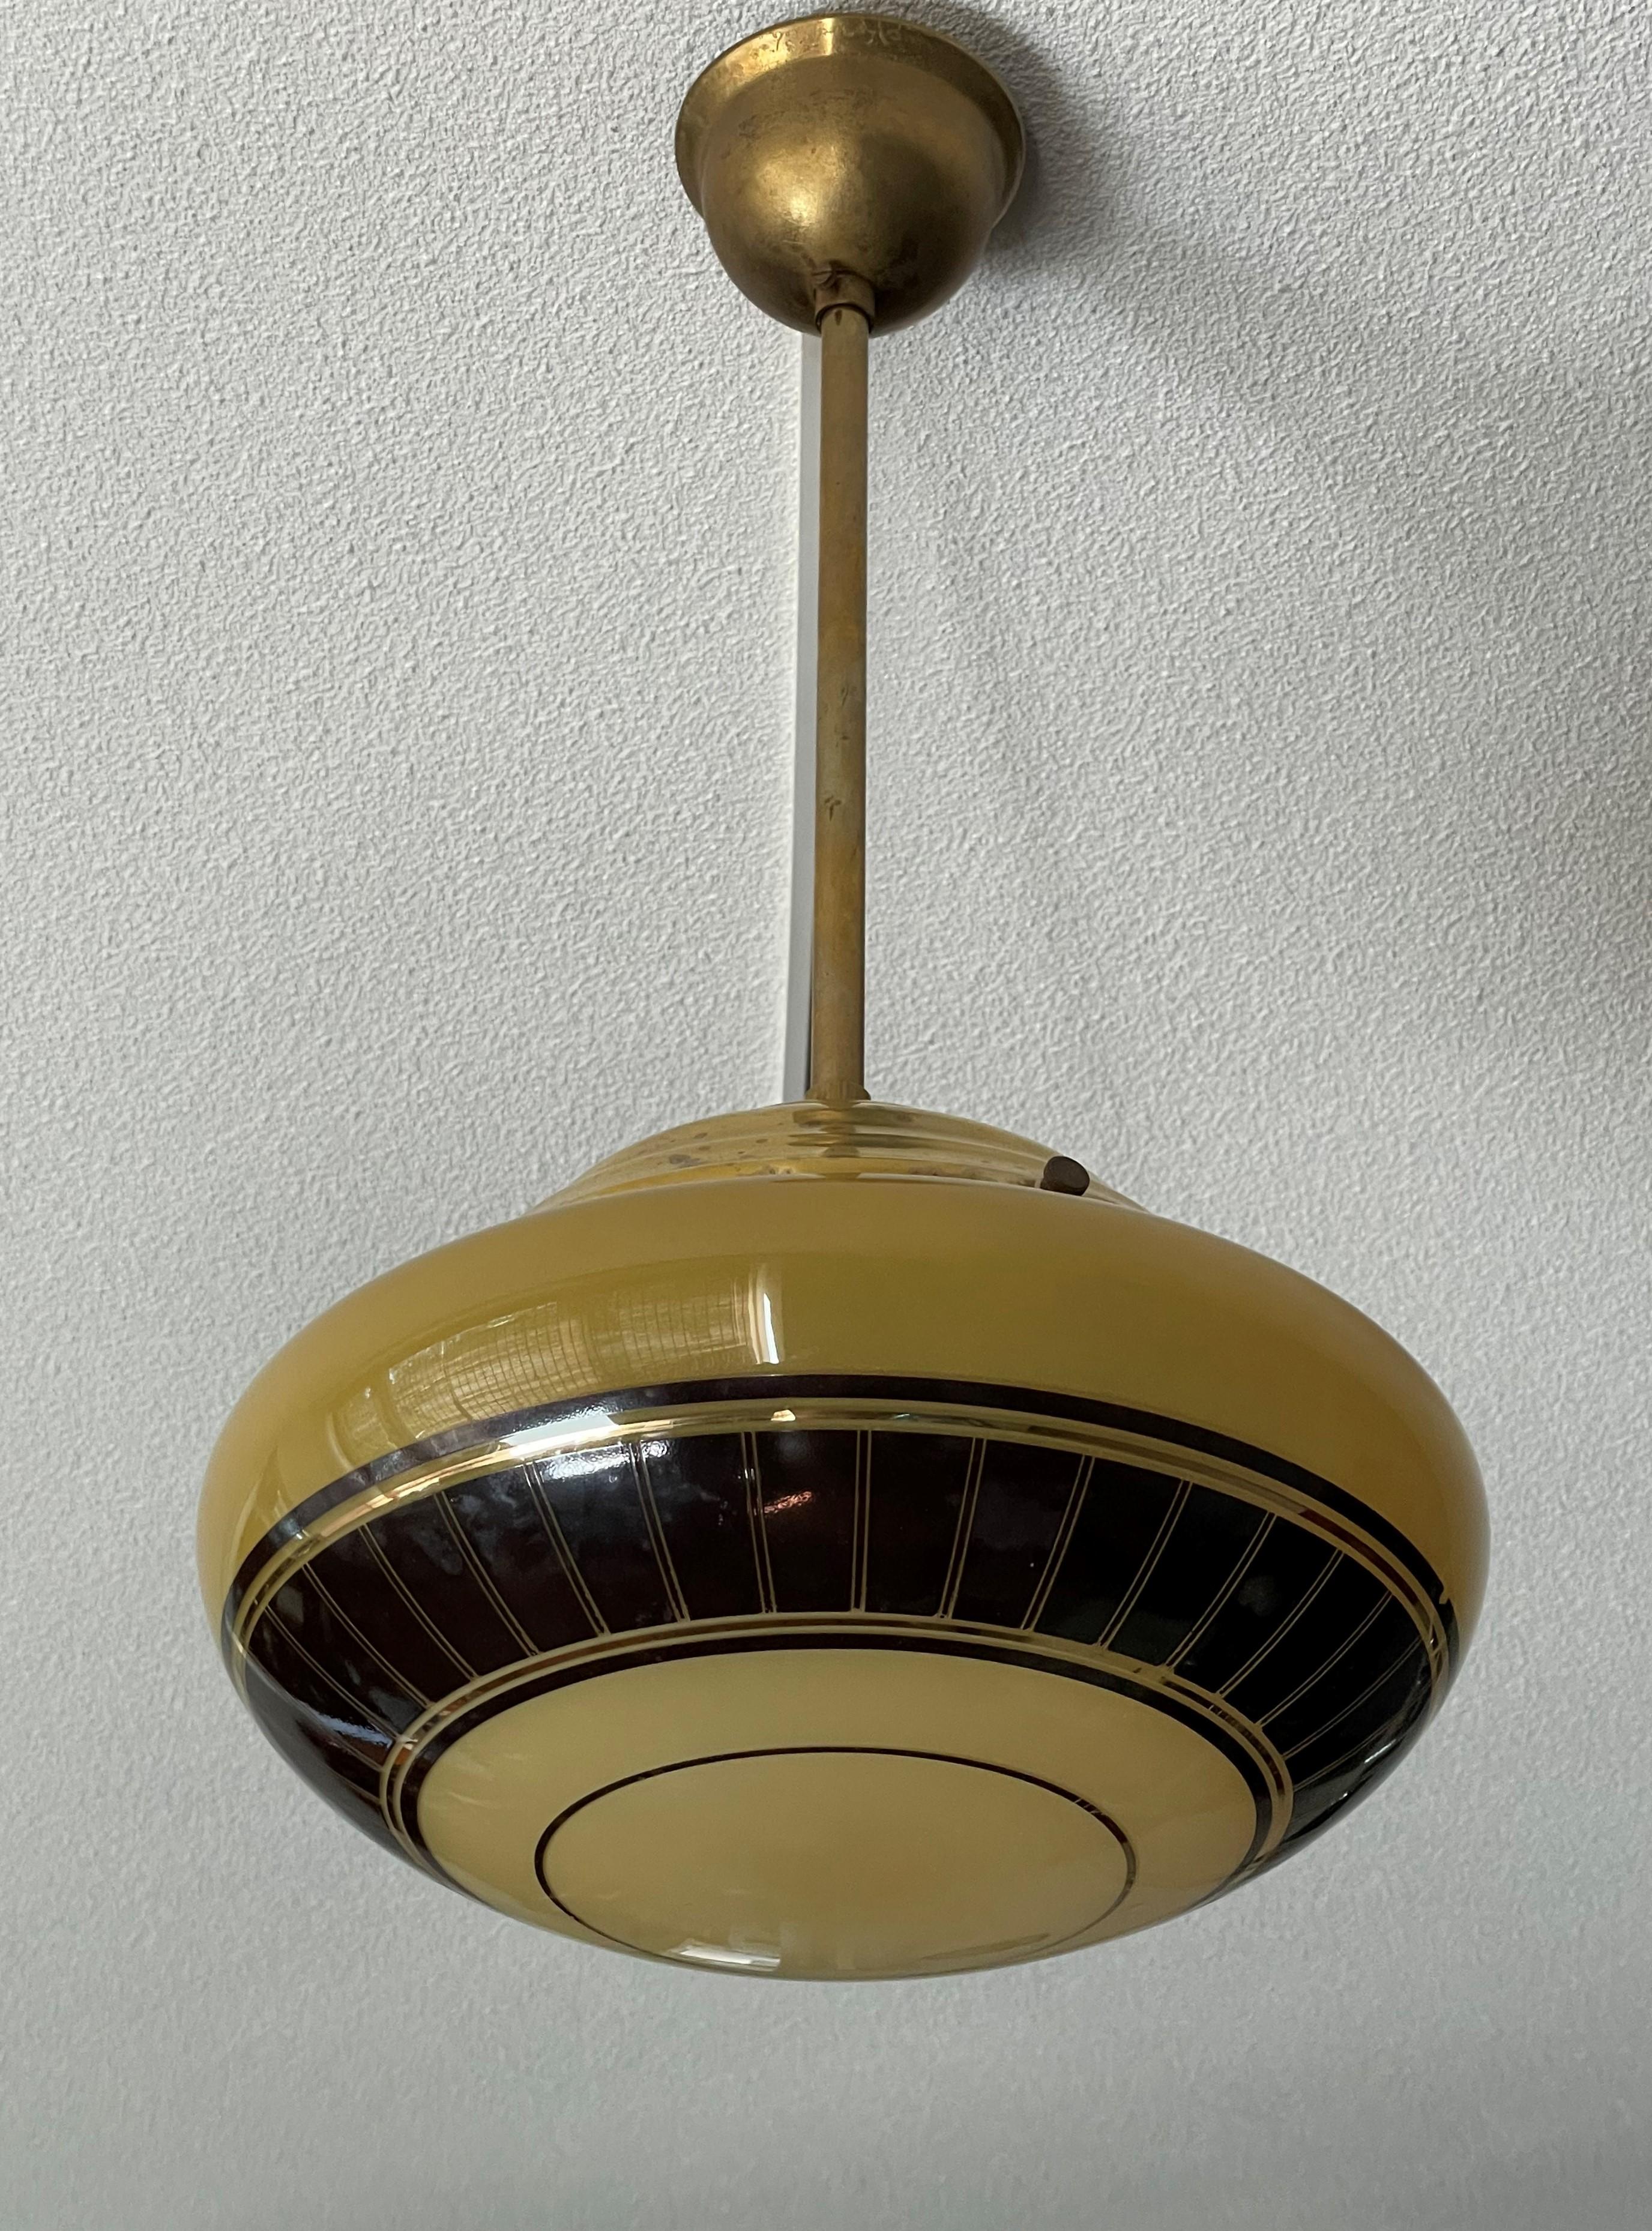 Wonderful design and cool looking midcentury ceiling lamp.

If you are a collector of rare and great looking midcentury design antiques then this stylish pendant from the 1950s could be perfect for you. This clean-lines design fixture comes with a